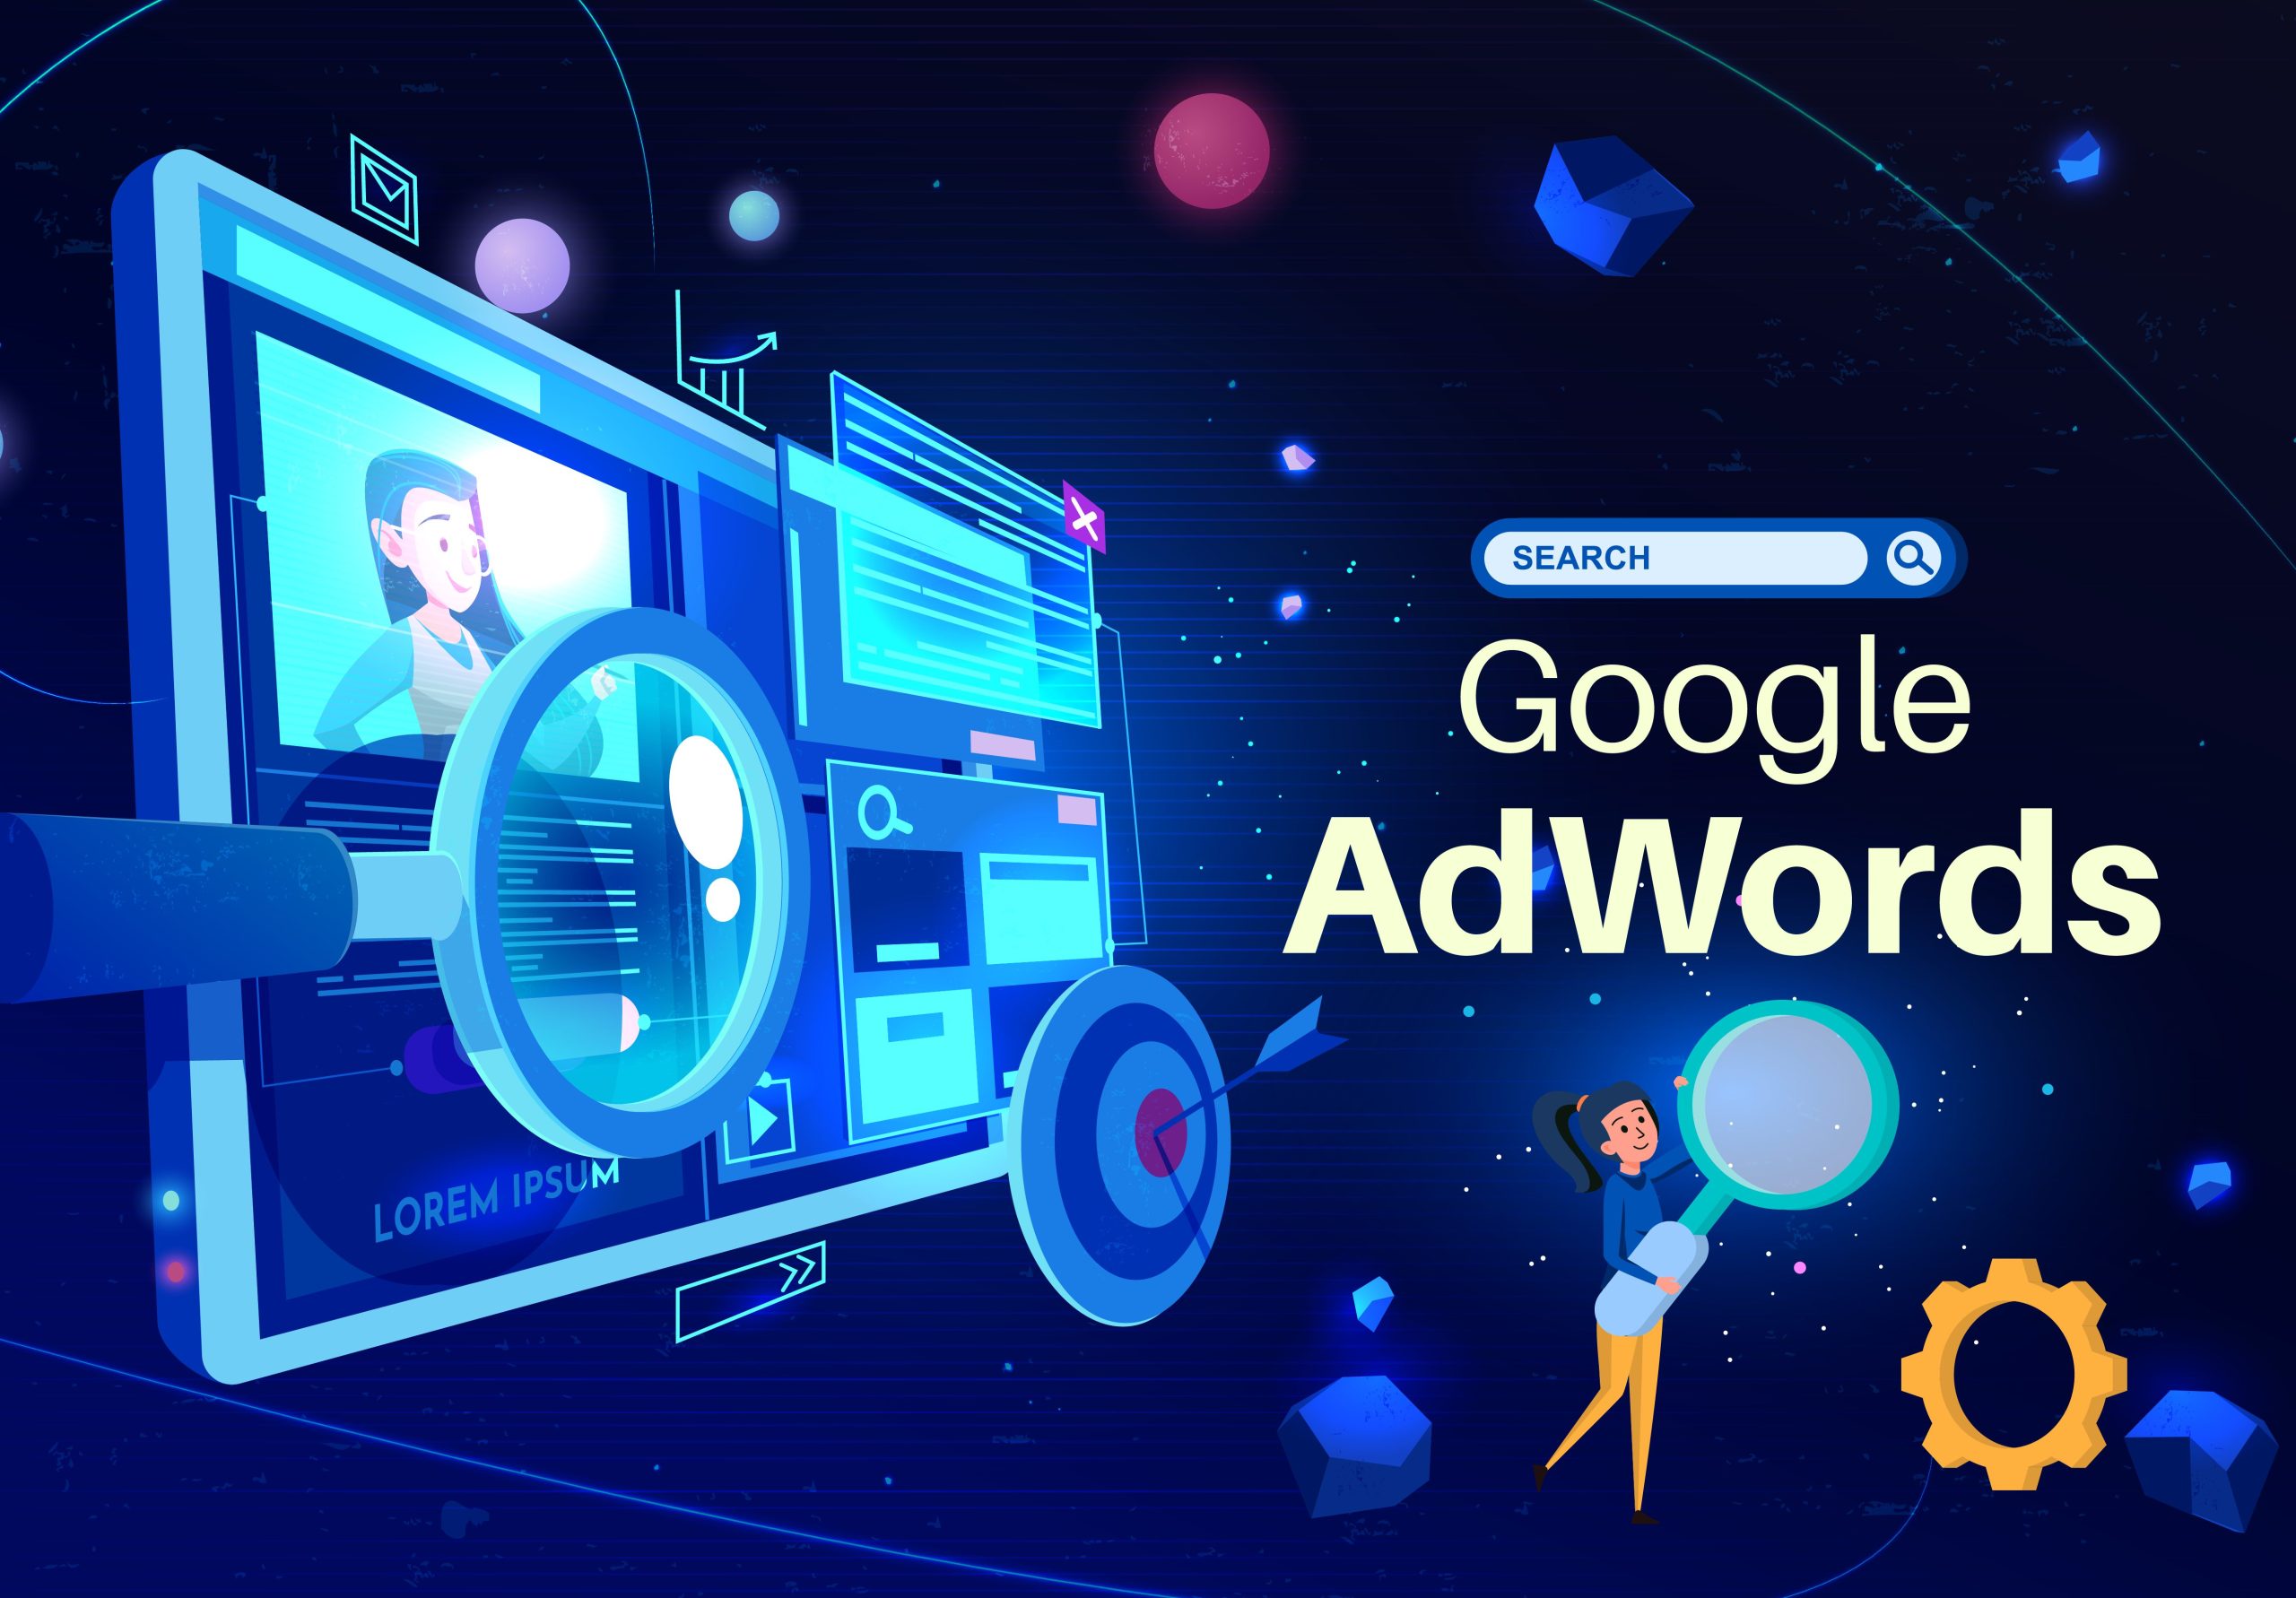 Google adwords and its benefits